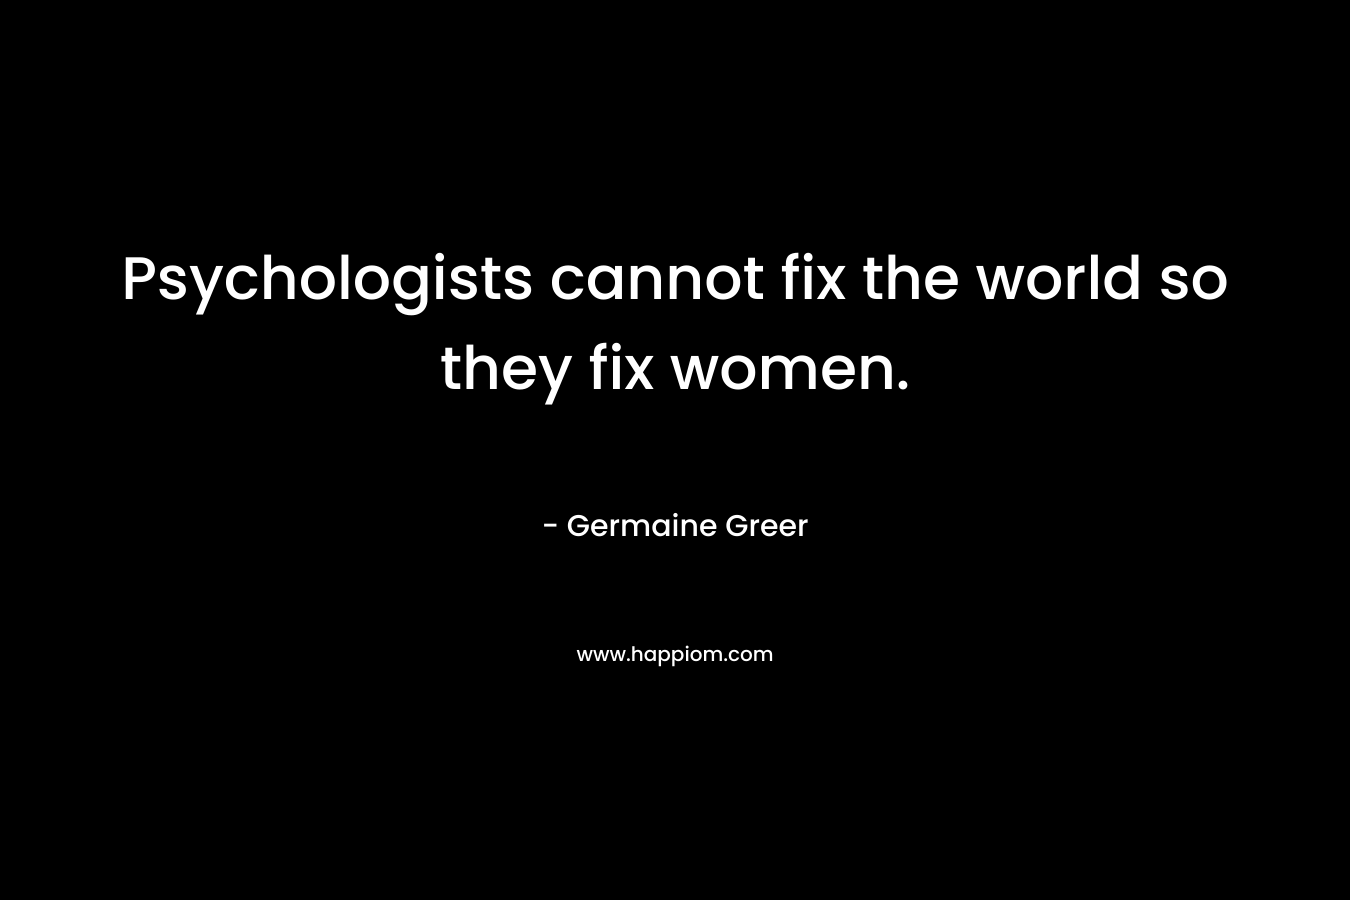 Psychologists cannot fix the world so they fix women. – Germaine Greer